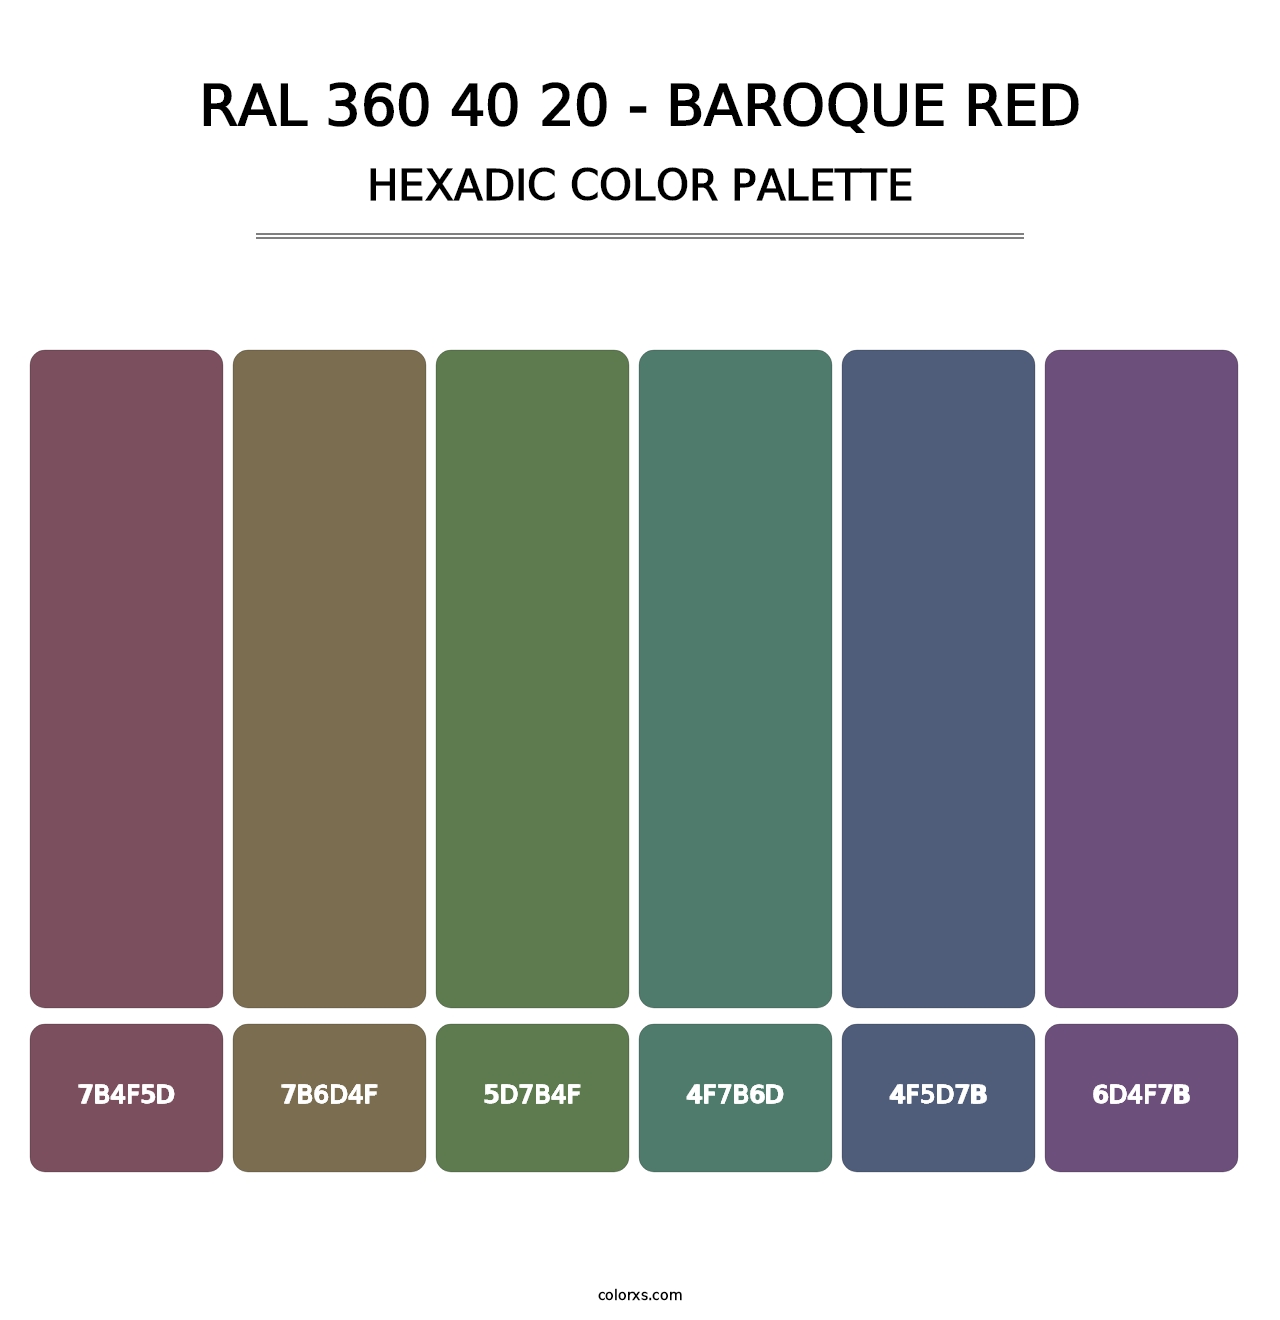 RAL 360 40 20 - Baroque Red - Hexadic Color Palette